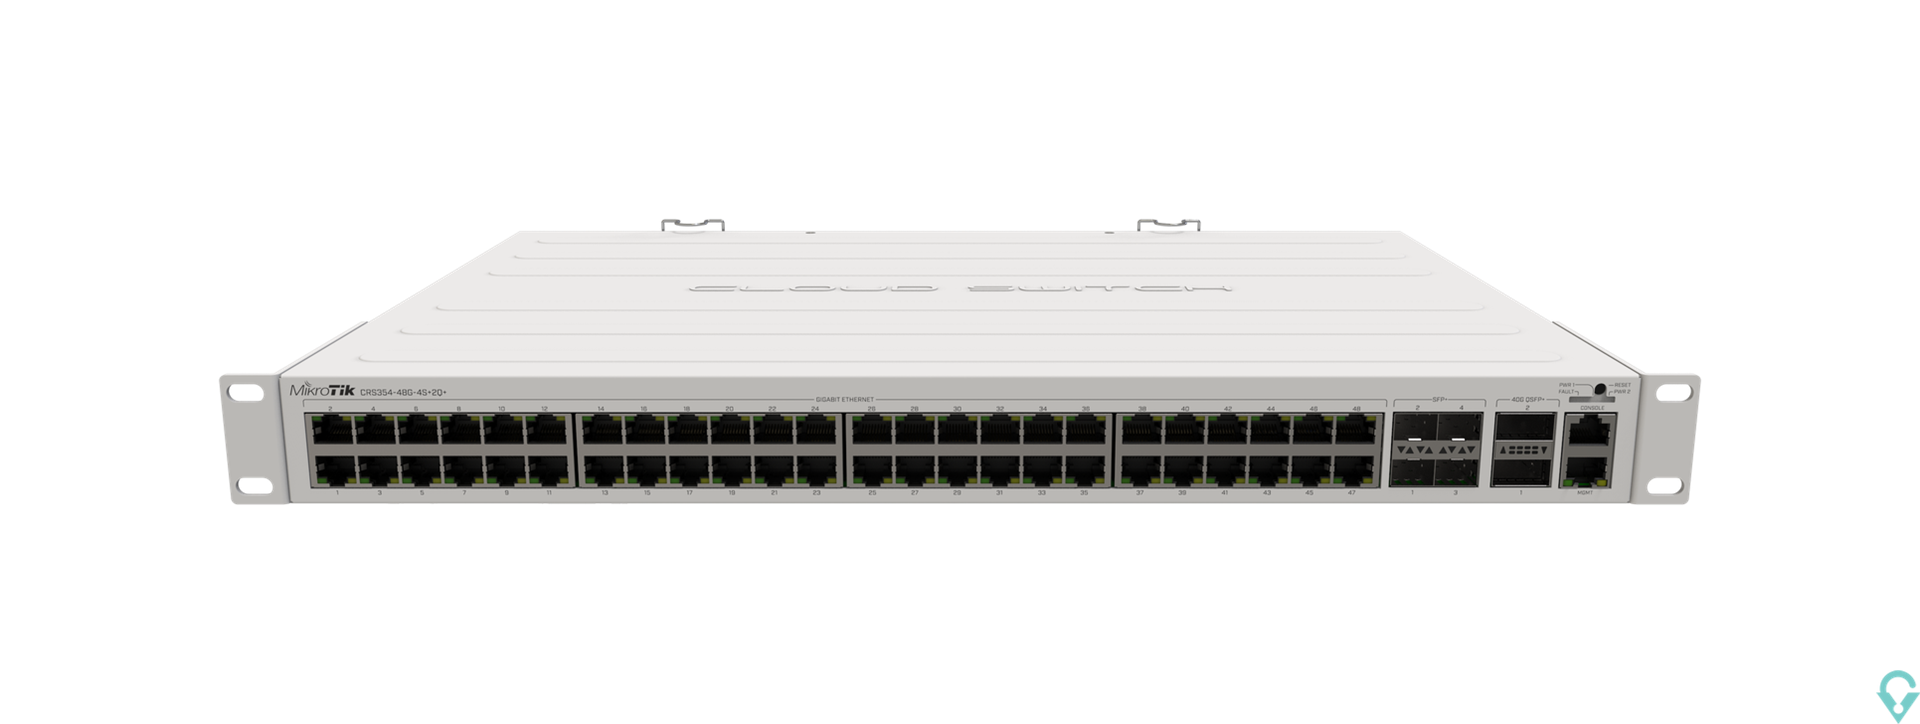 Picture of CRS354-48G-4S+2Q+RM Cloud Router Switch 354-48G-4S+2Q+RM with 48 x Gigabit RJ45 LAN, 4 x 10G SFP+ cages, 2 x 40G QSFP+ cages, Ro